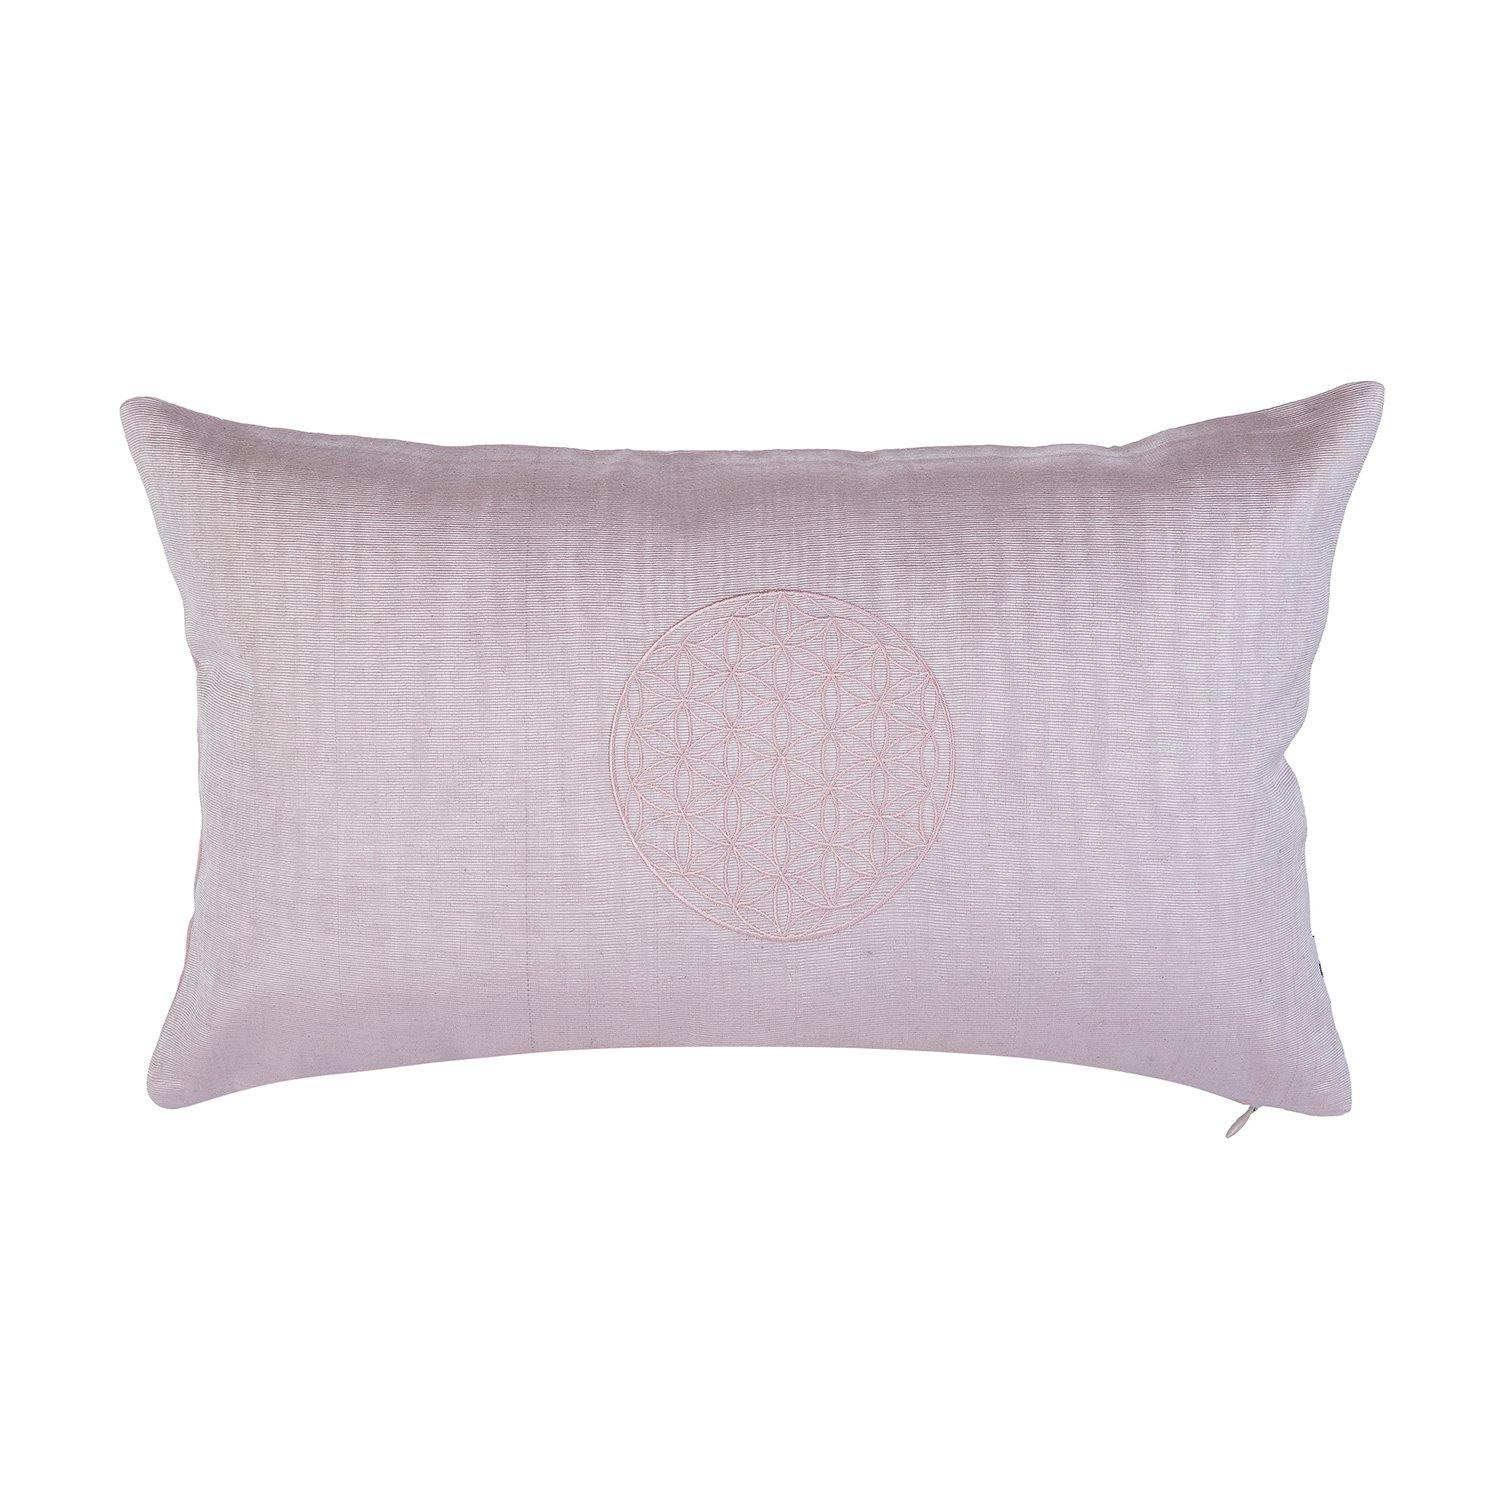 Kutnu Silk Pillow with Embroidery - Pink Flower of Life - bohemtolia